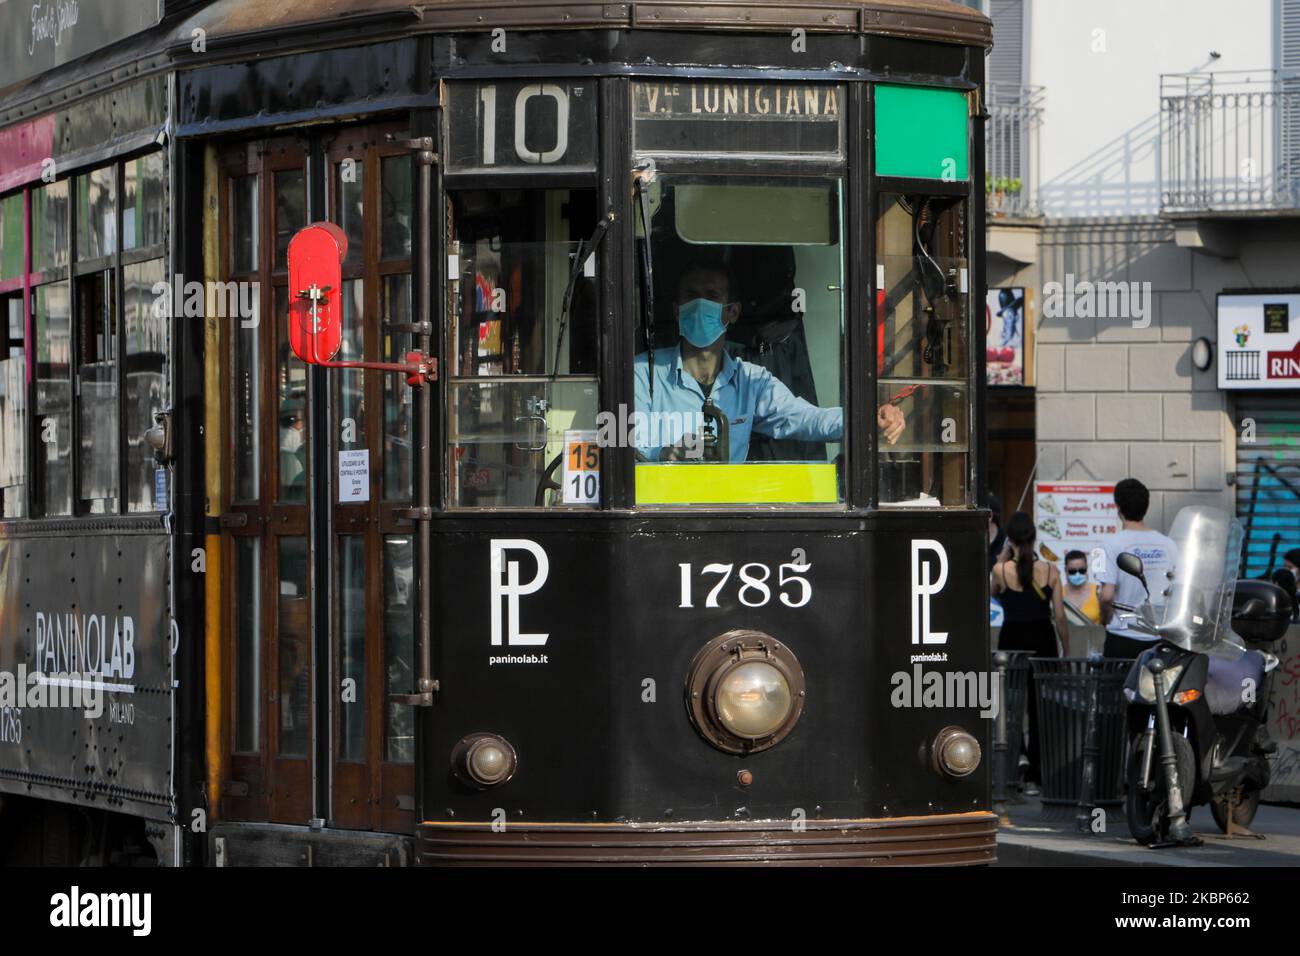 The driver of a tram wears a protective mask during the work shift in Navigli at the beginning of the weekend in Milan on May 22, 2020 in Milan, Italy. Restaurants, bars, cafes, hairdressers and other shops have reopened, subject to social distancing measures, after more than two months of a nationwide lockdown meant to curb the spread of Covid-19 (Photo by Mairo Cinquetti/NurPhoto) Stock Photo